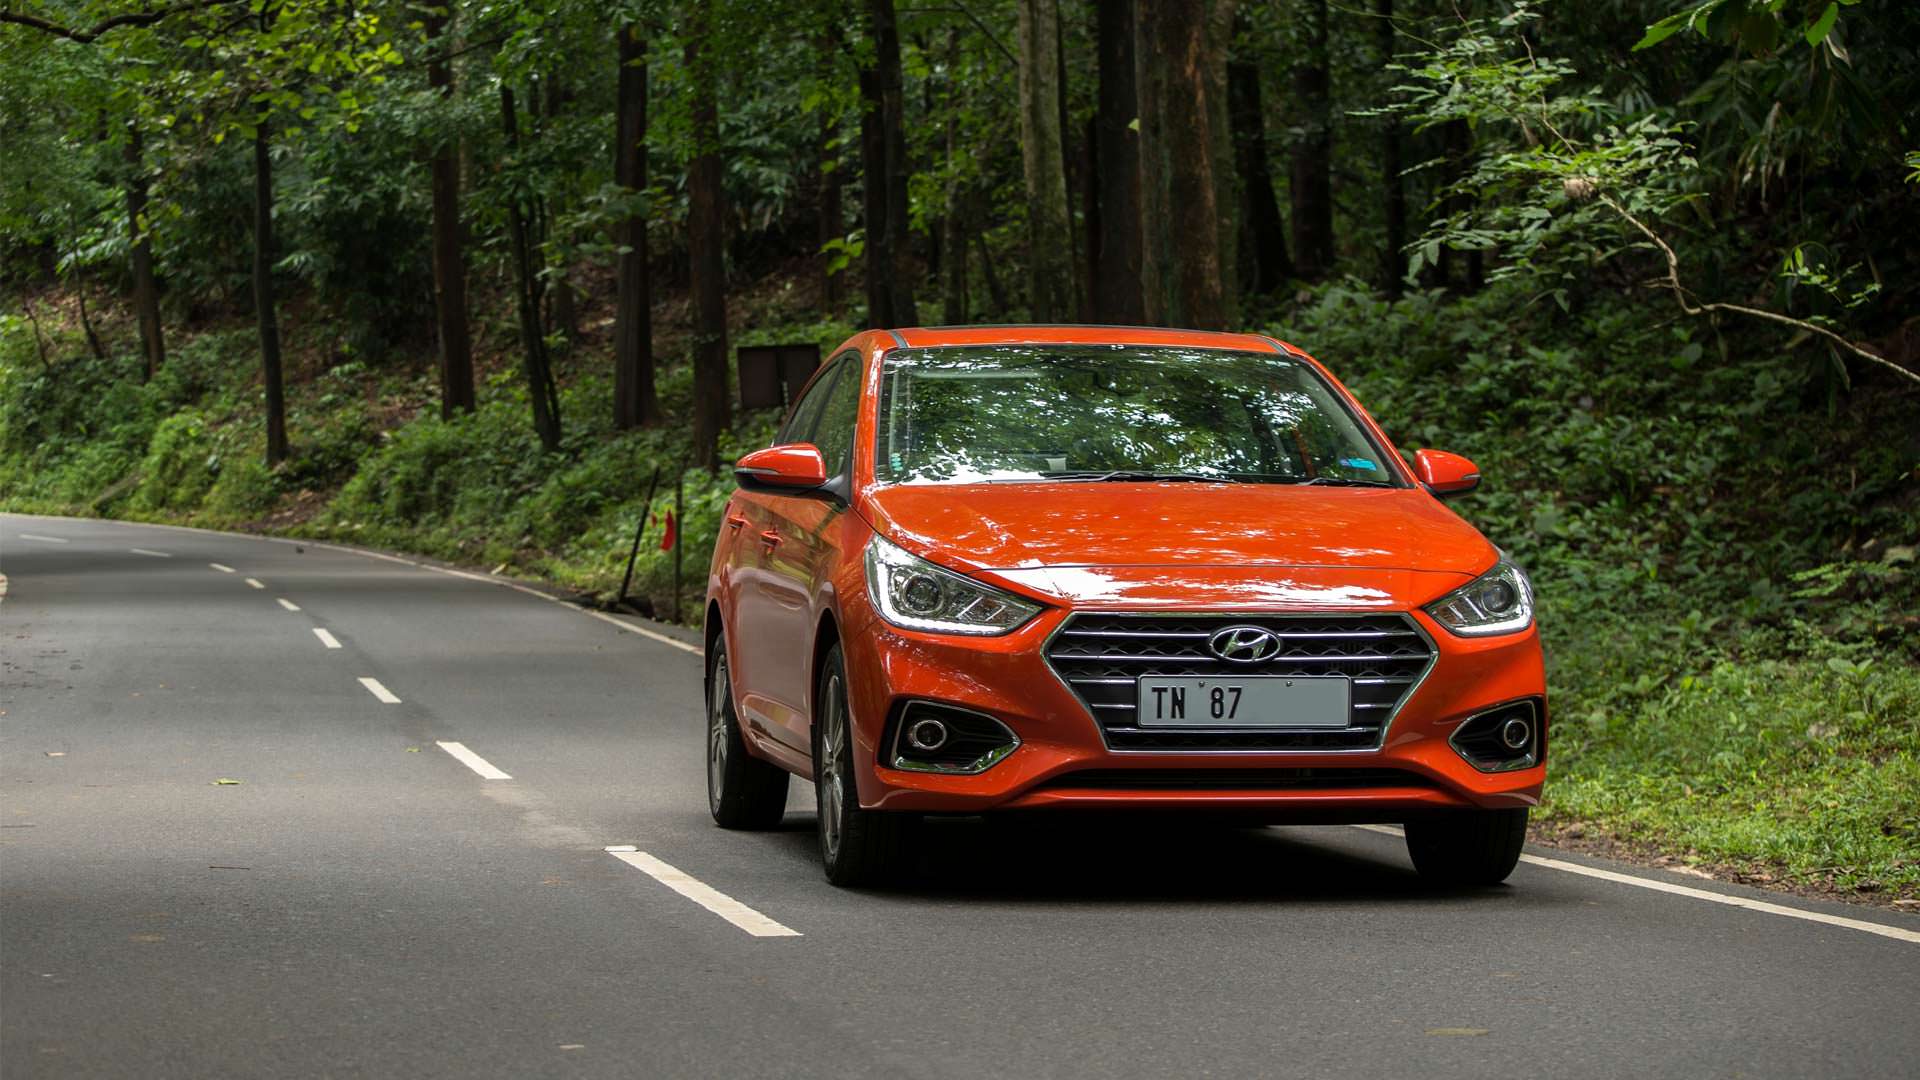 New Hyundai Verna receives 000 bookings in 2 months